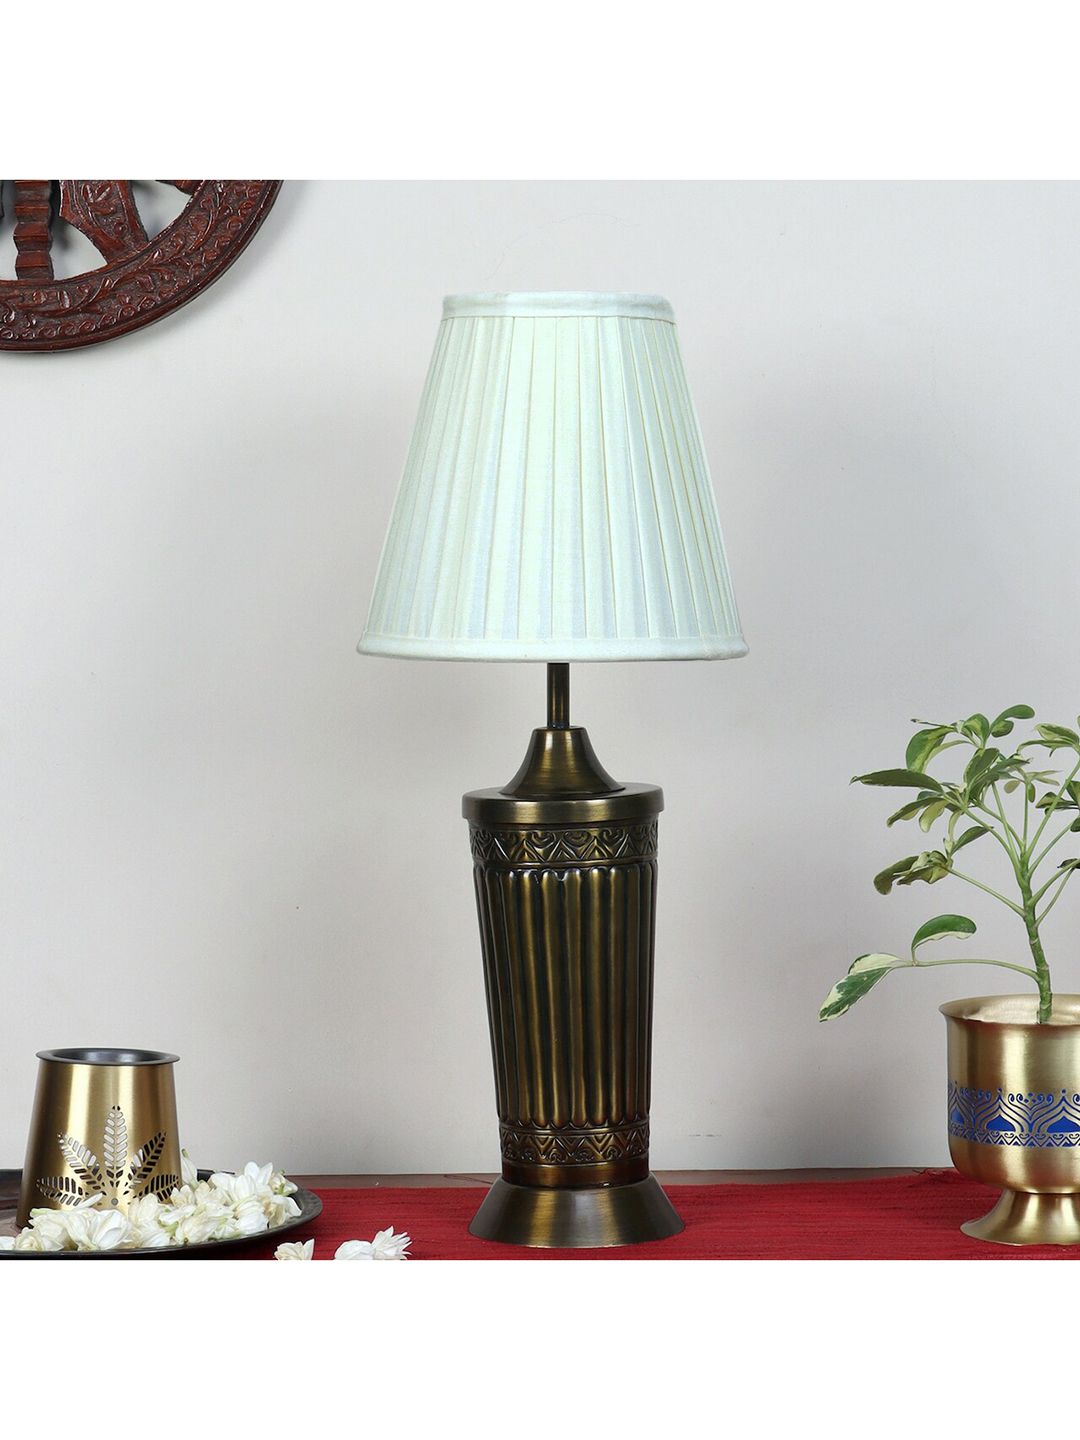 nakshikathaa Brown & White Traditional Table Lamp with Ivory Pleated Shade Price in India